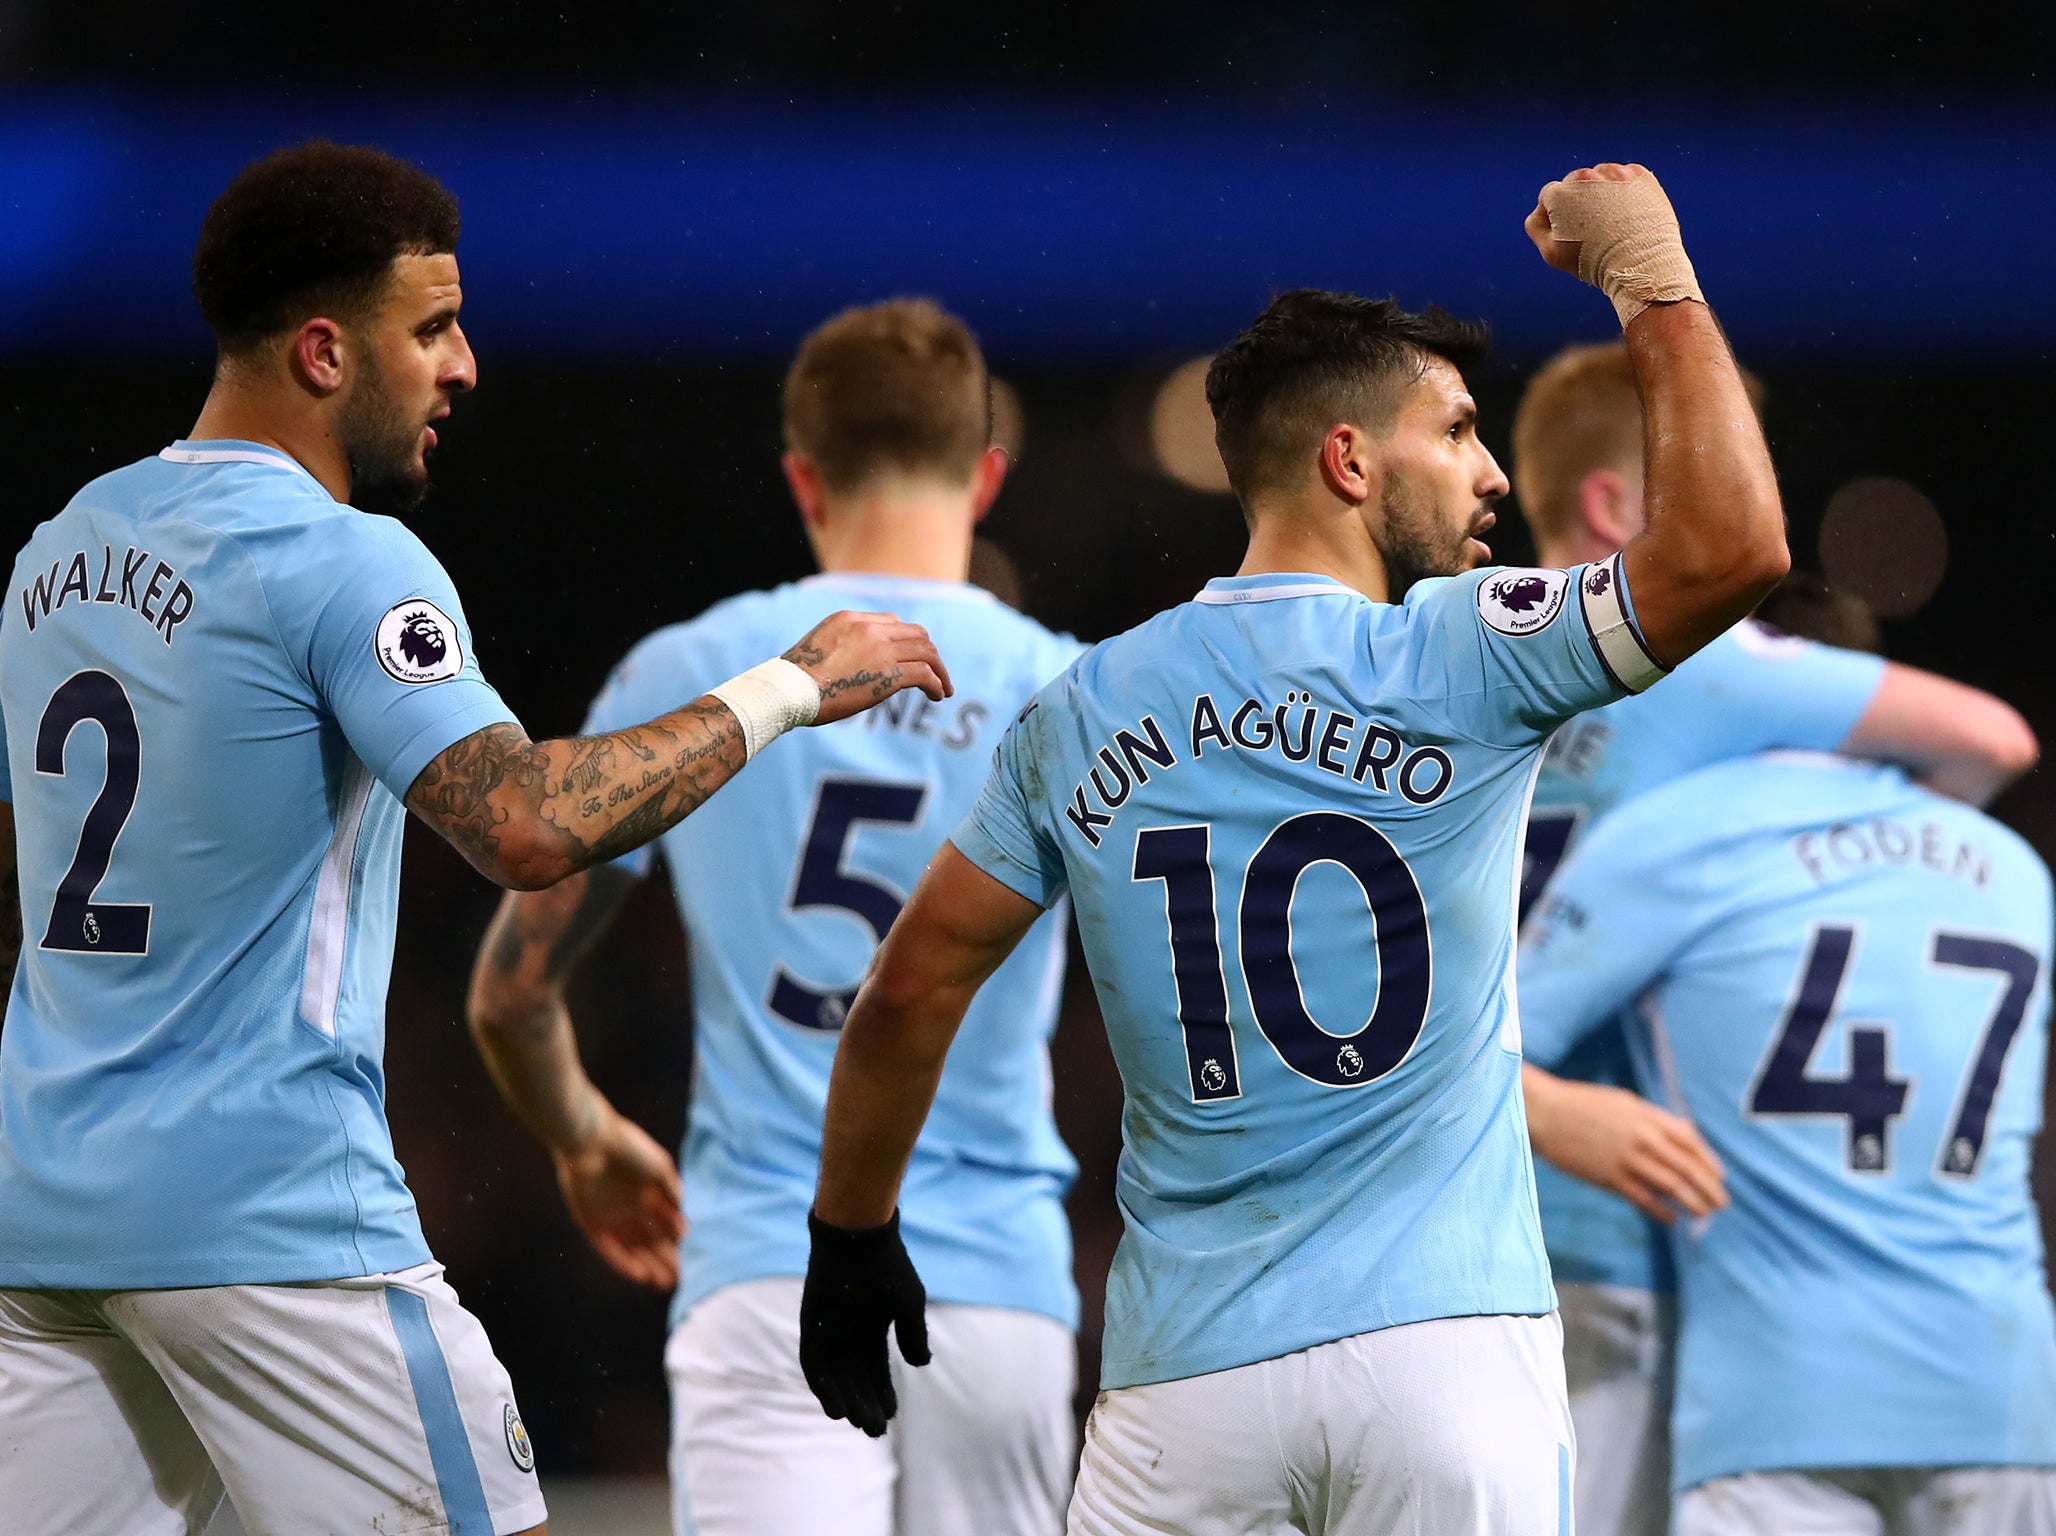 Sergio Aguero hit four goals in the rout